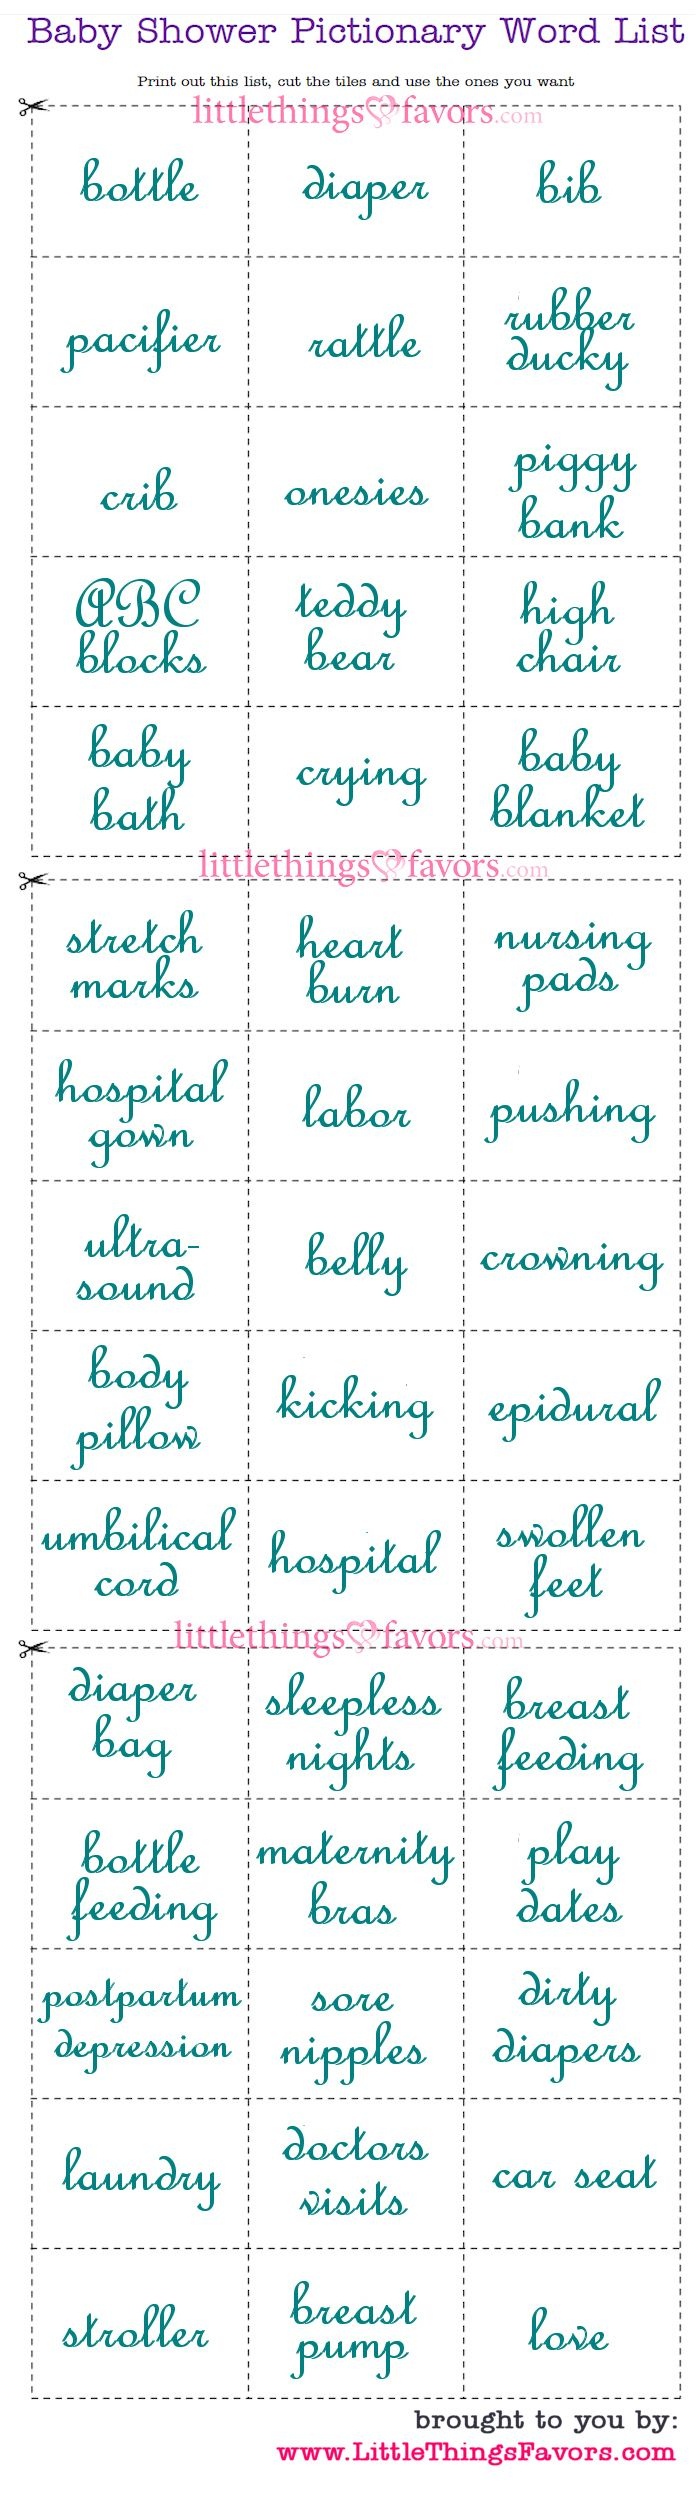 Free Baby Shower Pictionary Word List To Print. #printables - Click - Free Printable Pictionary Cards